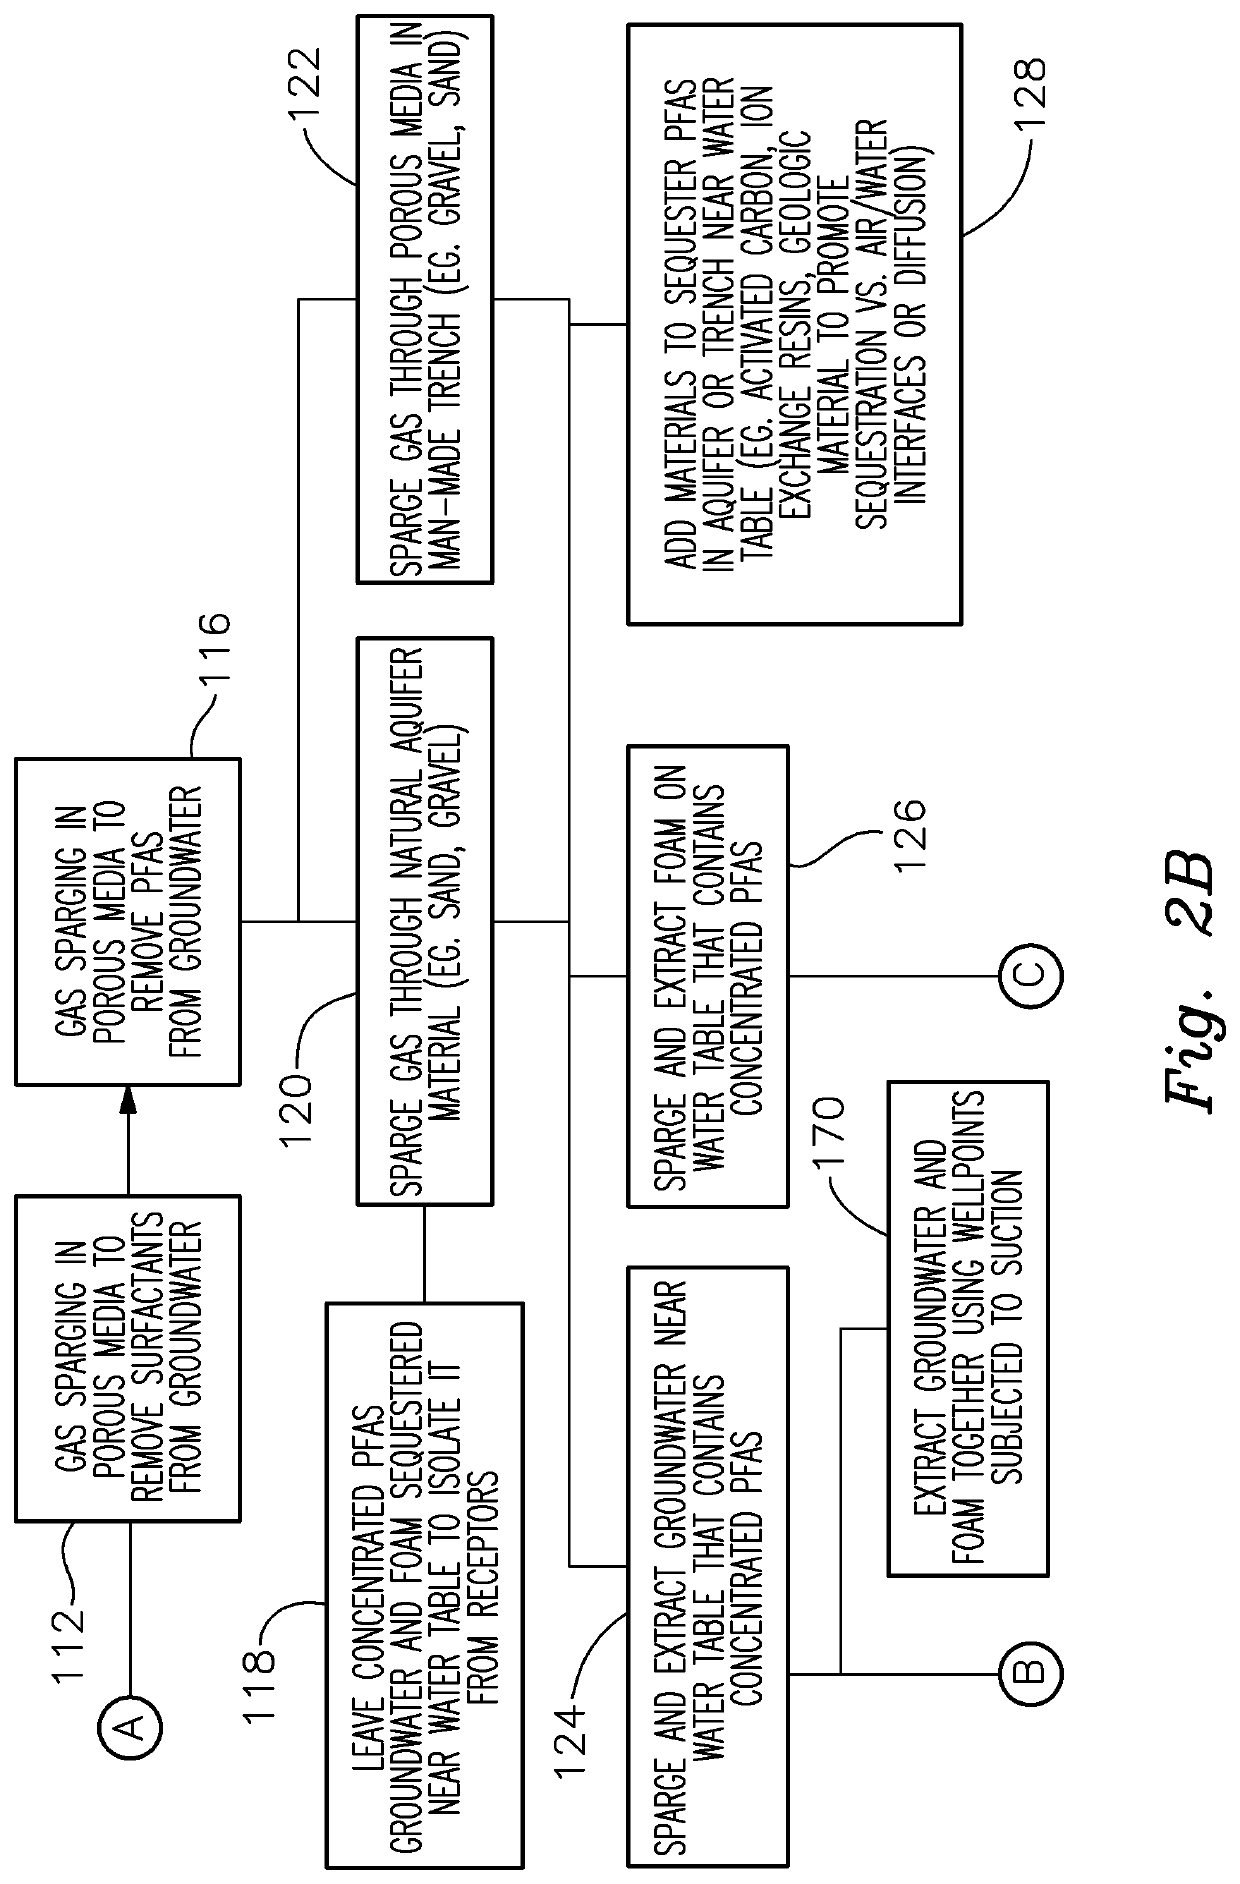 Method and Apparatus for Removal of Per- and Polyfluoroalkyl Substances (PFAS) from Groundwater